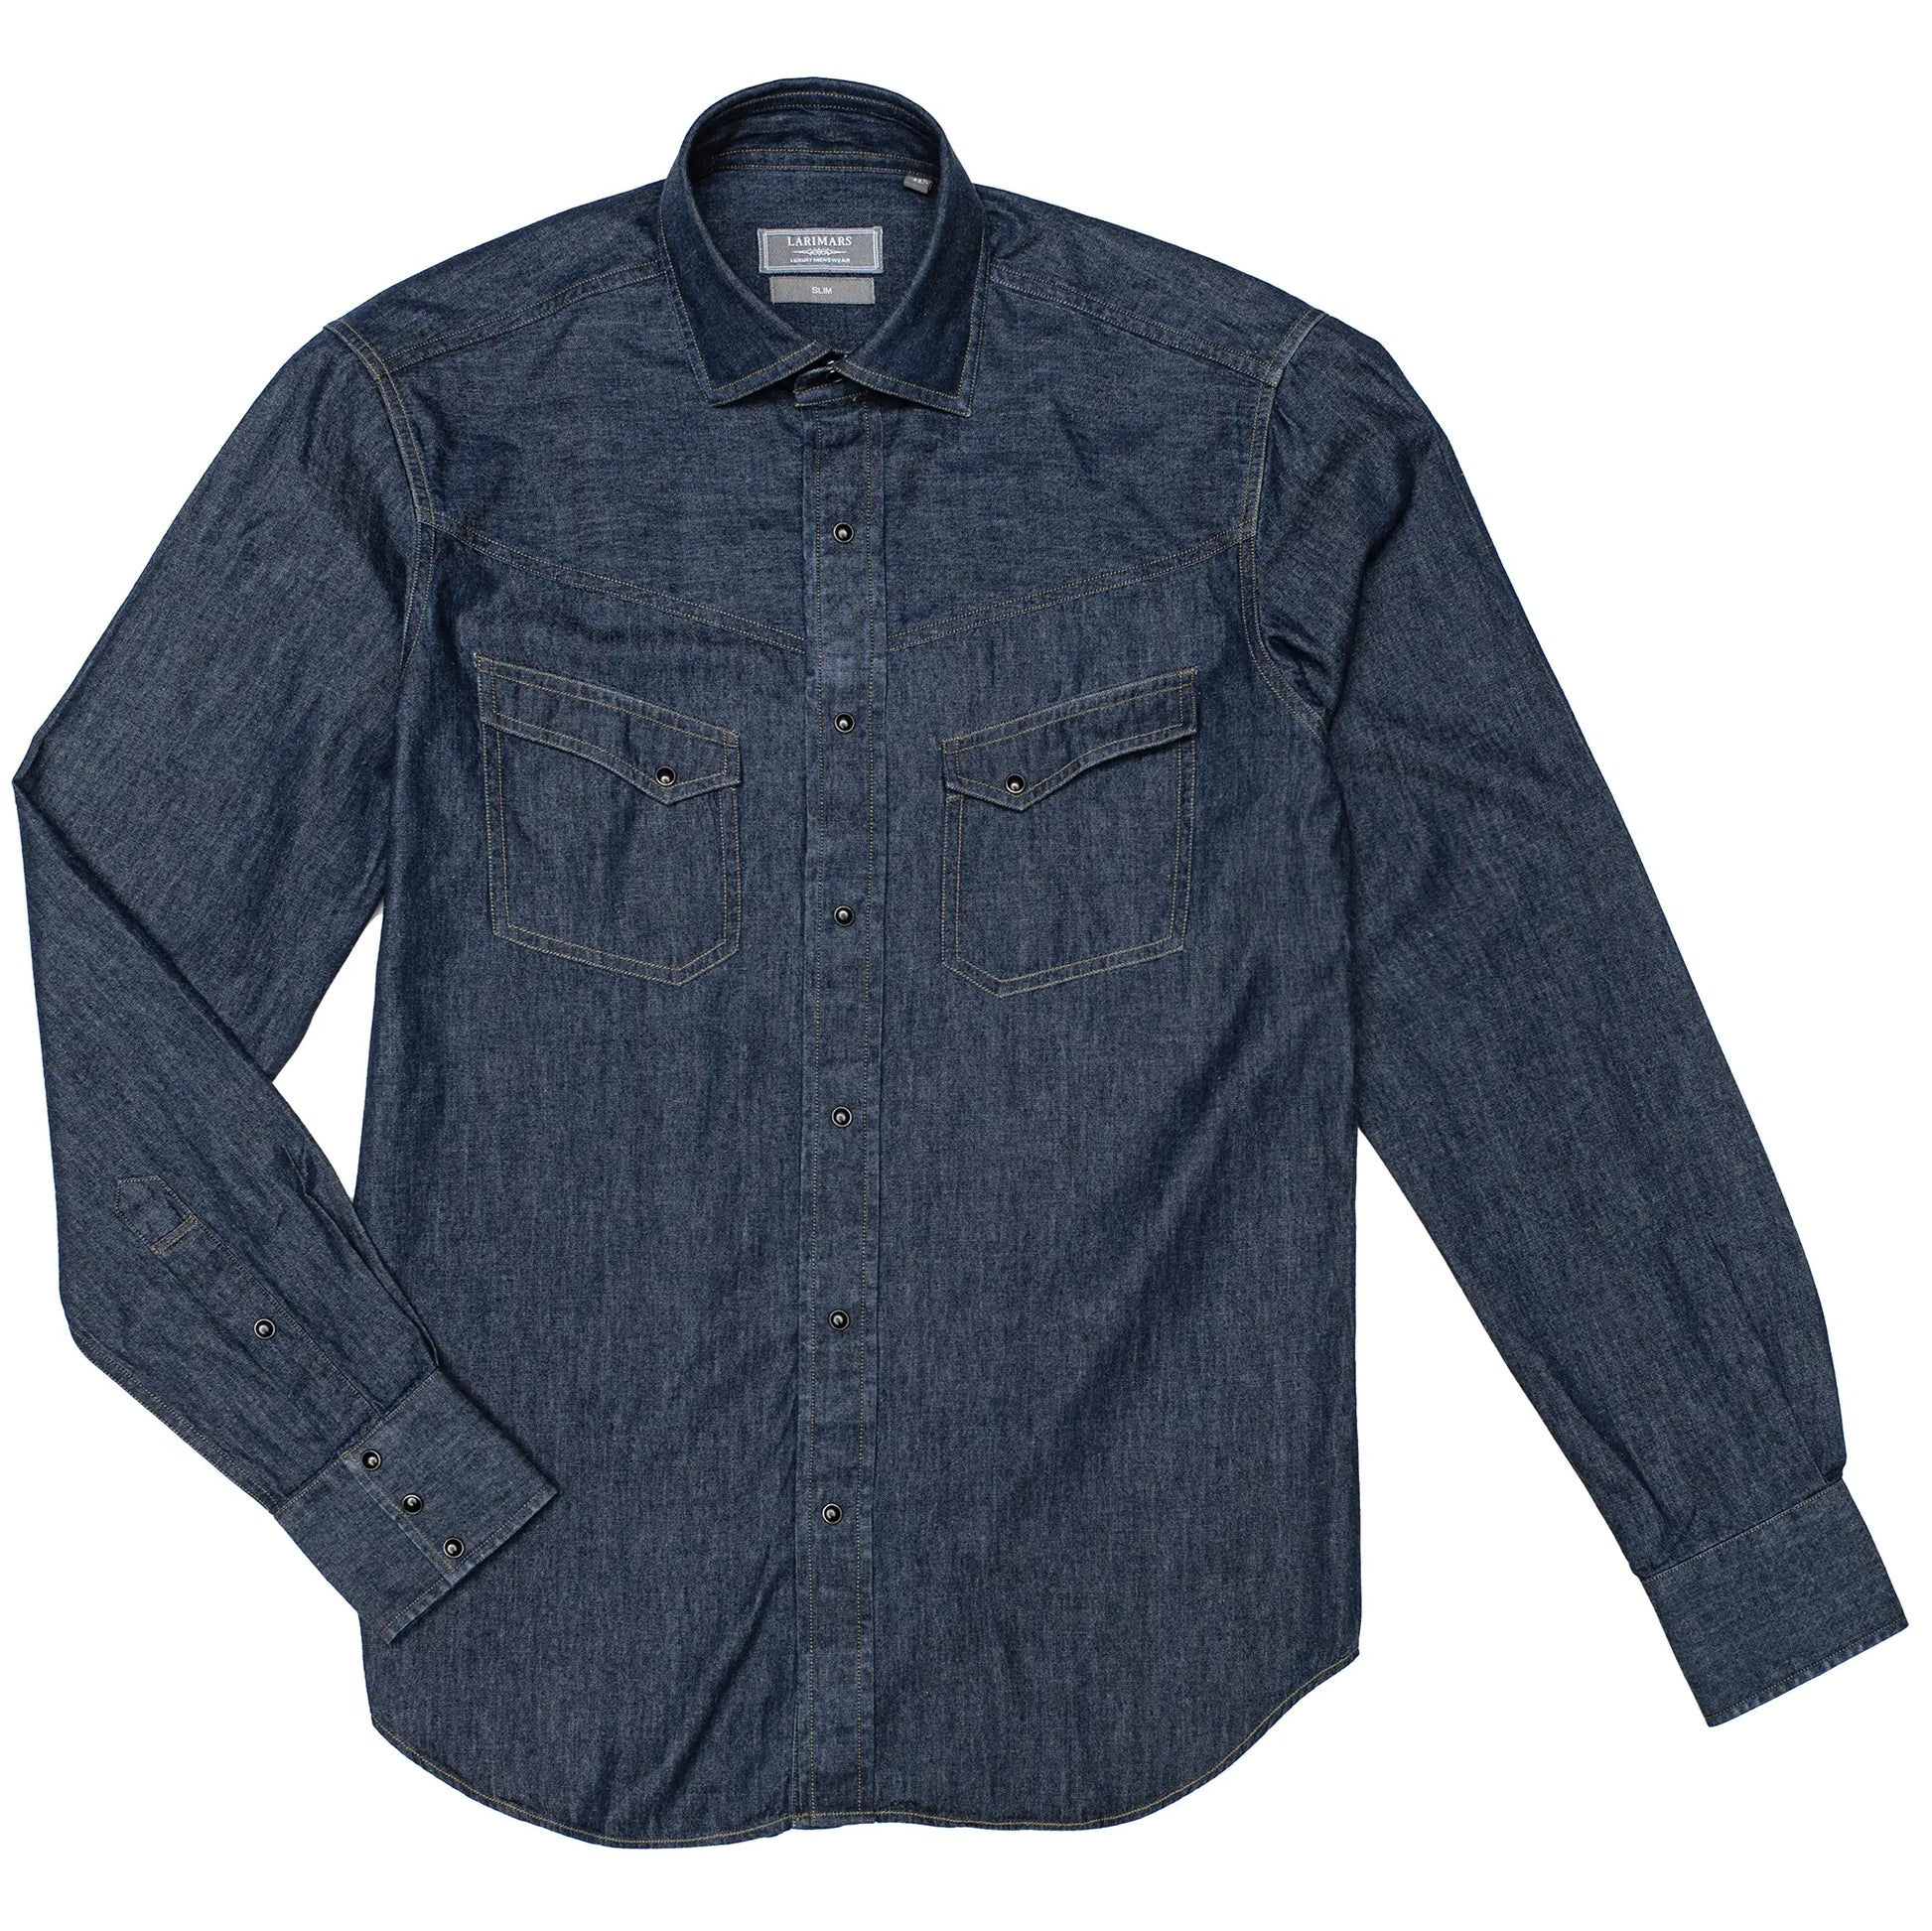 Enzyme Washed - Western Style Denim - Larimars Clothing Men's Formal and casual wear shirts